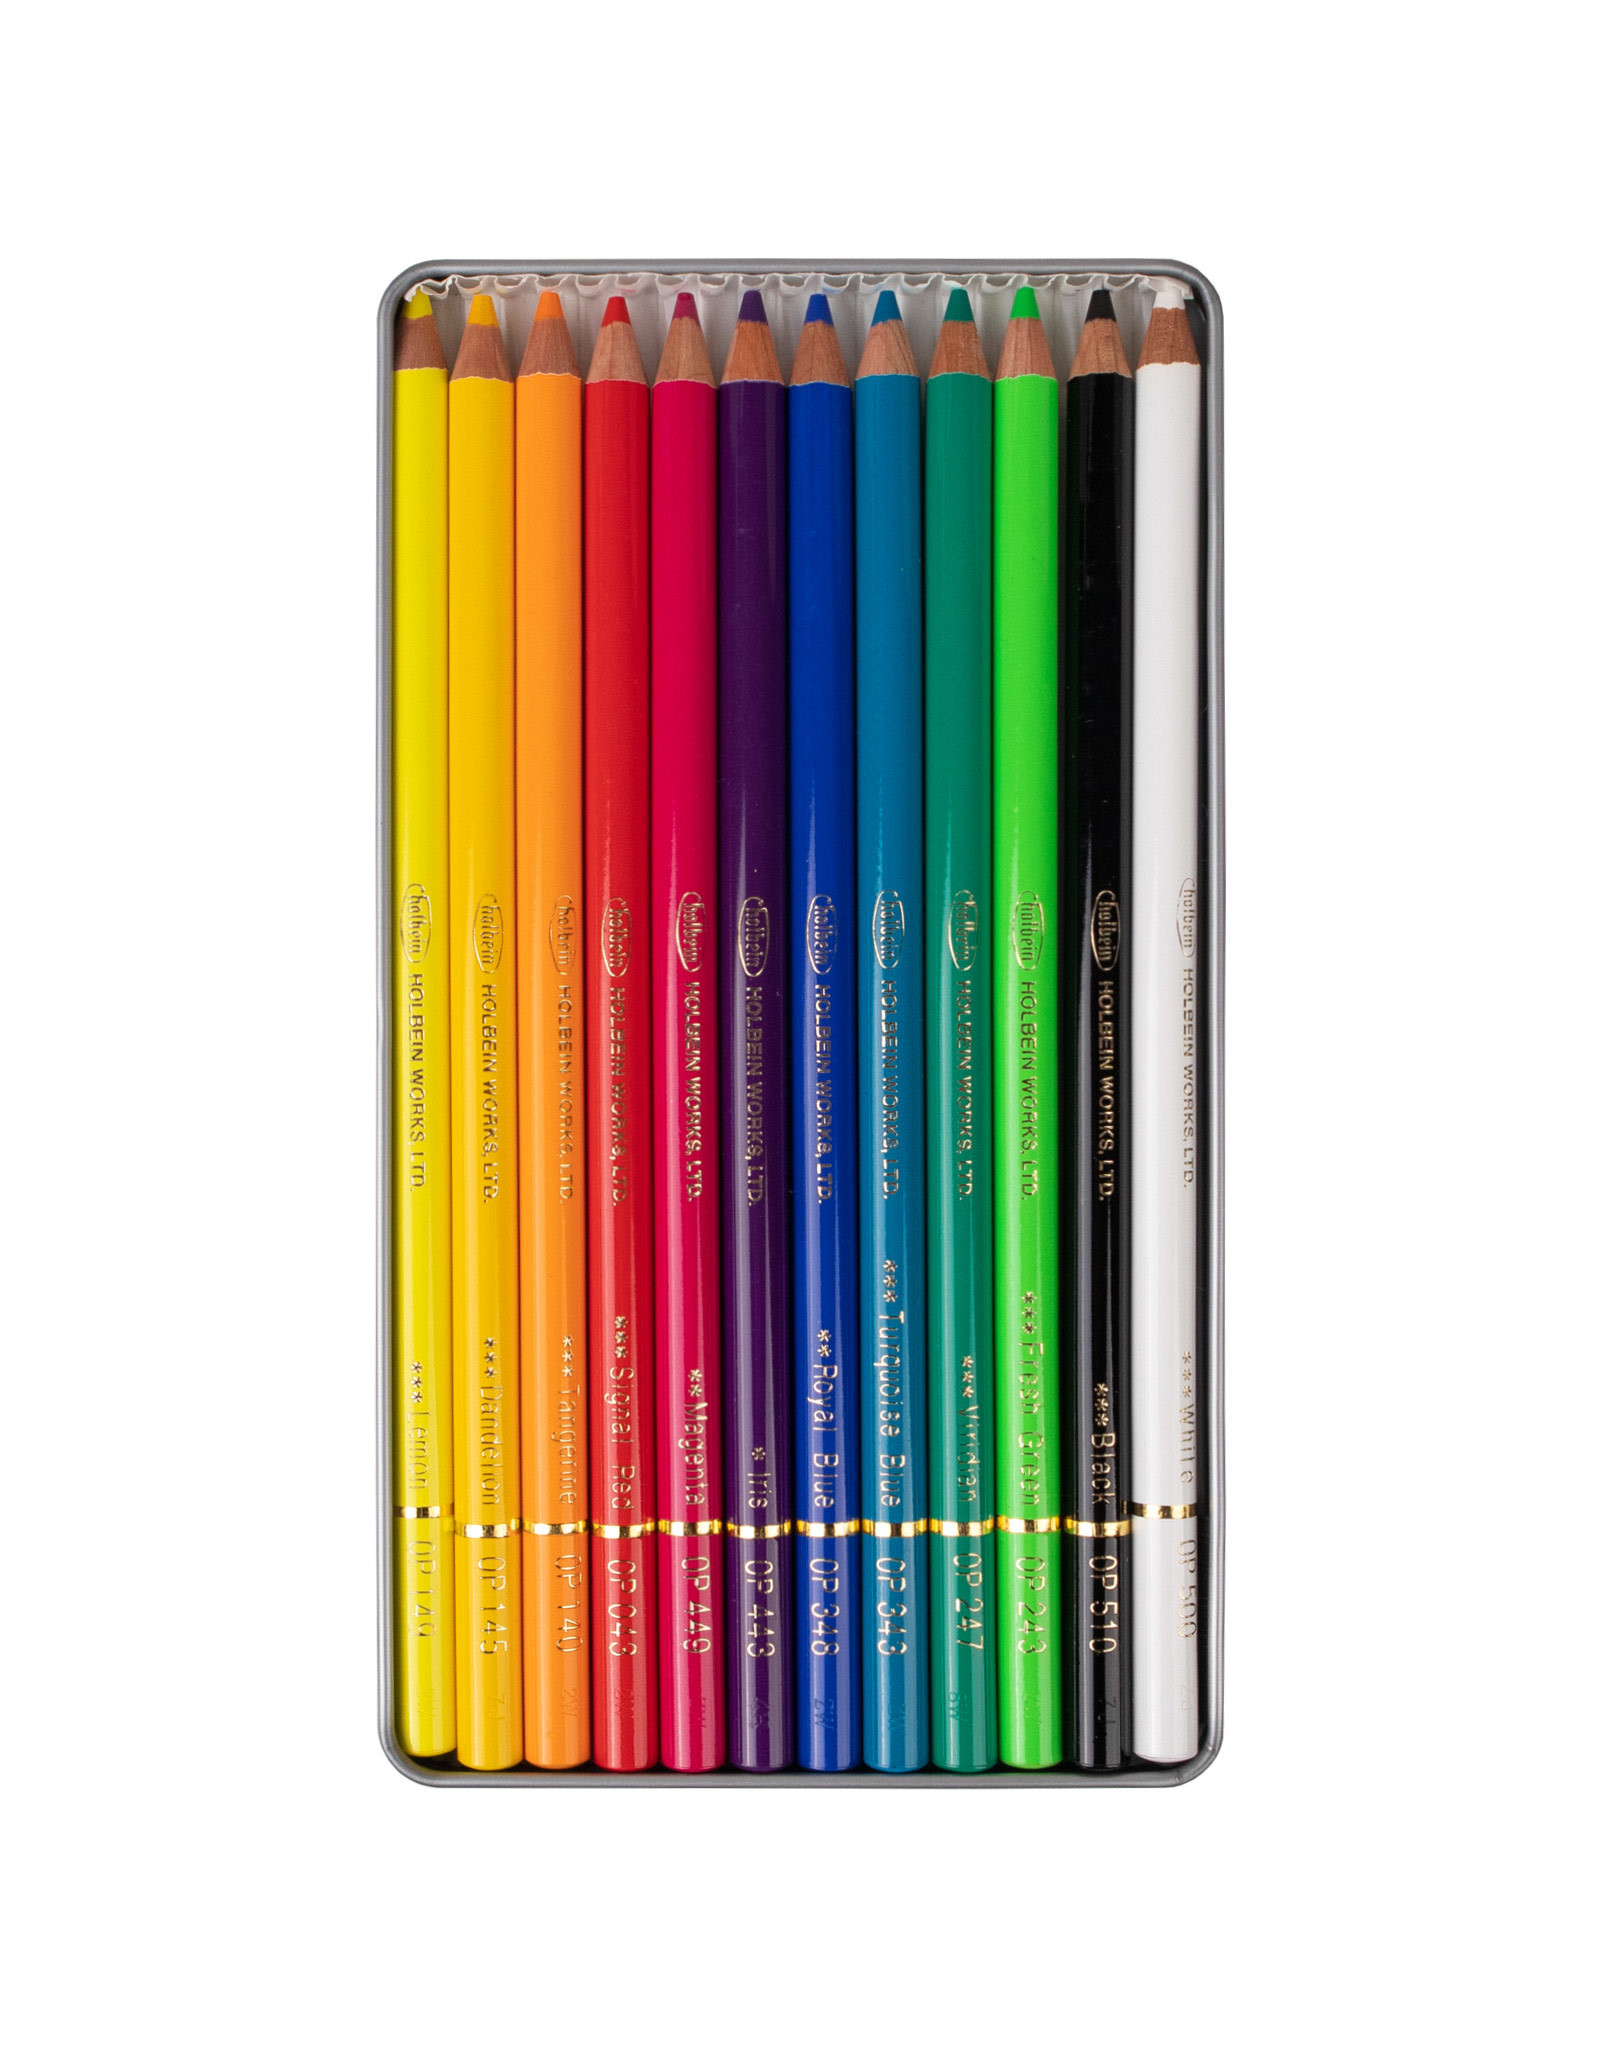 HOLBEIN Holbein Colored Pencils, Design Tone Set of 12